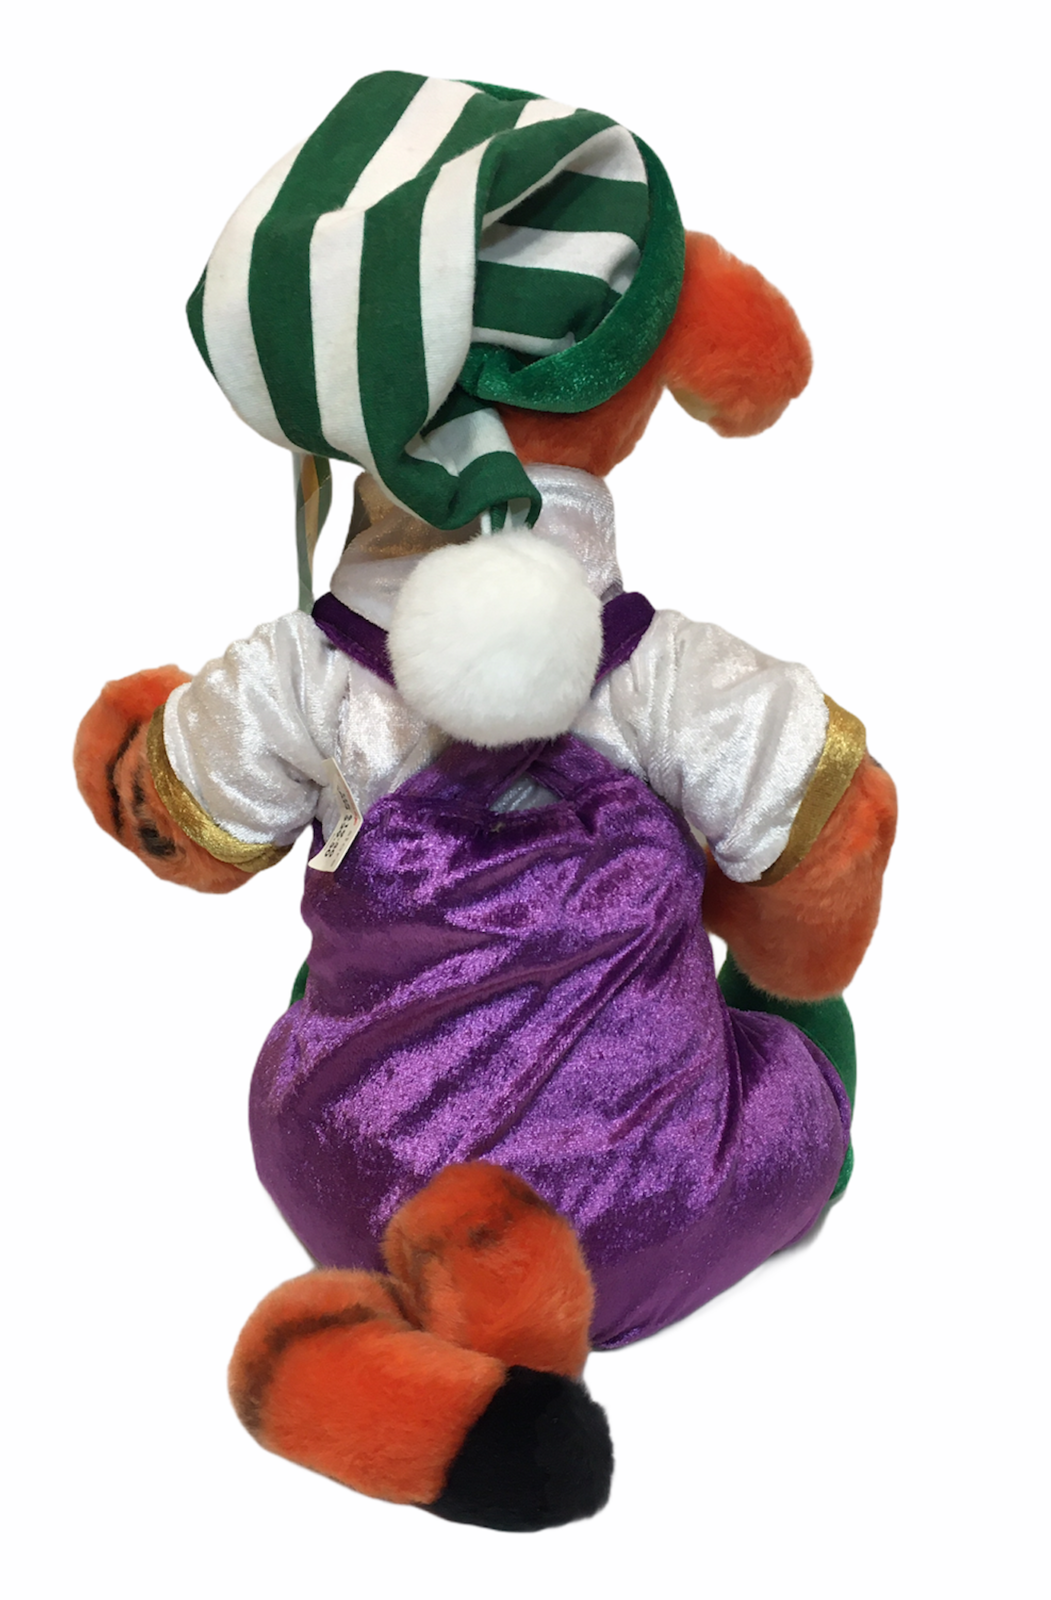 Jingle Bell Winnie The Pooh Works Disney for sale online Tigger Elf Plush 13 In 